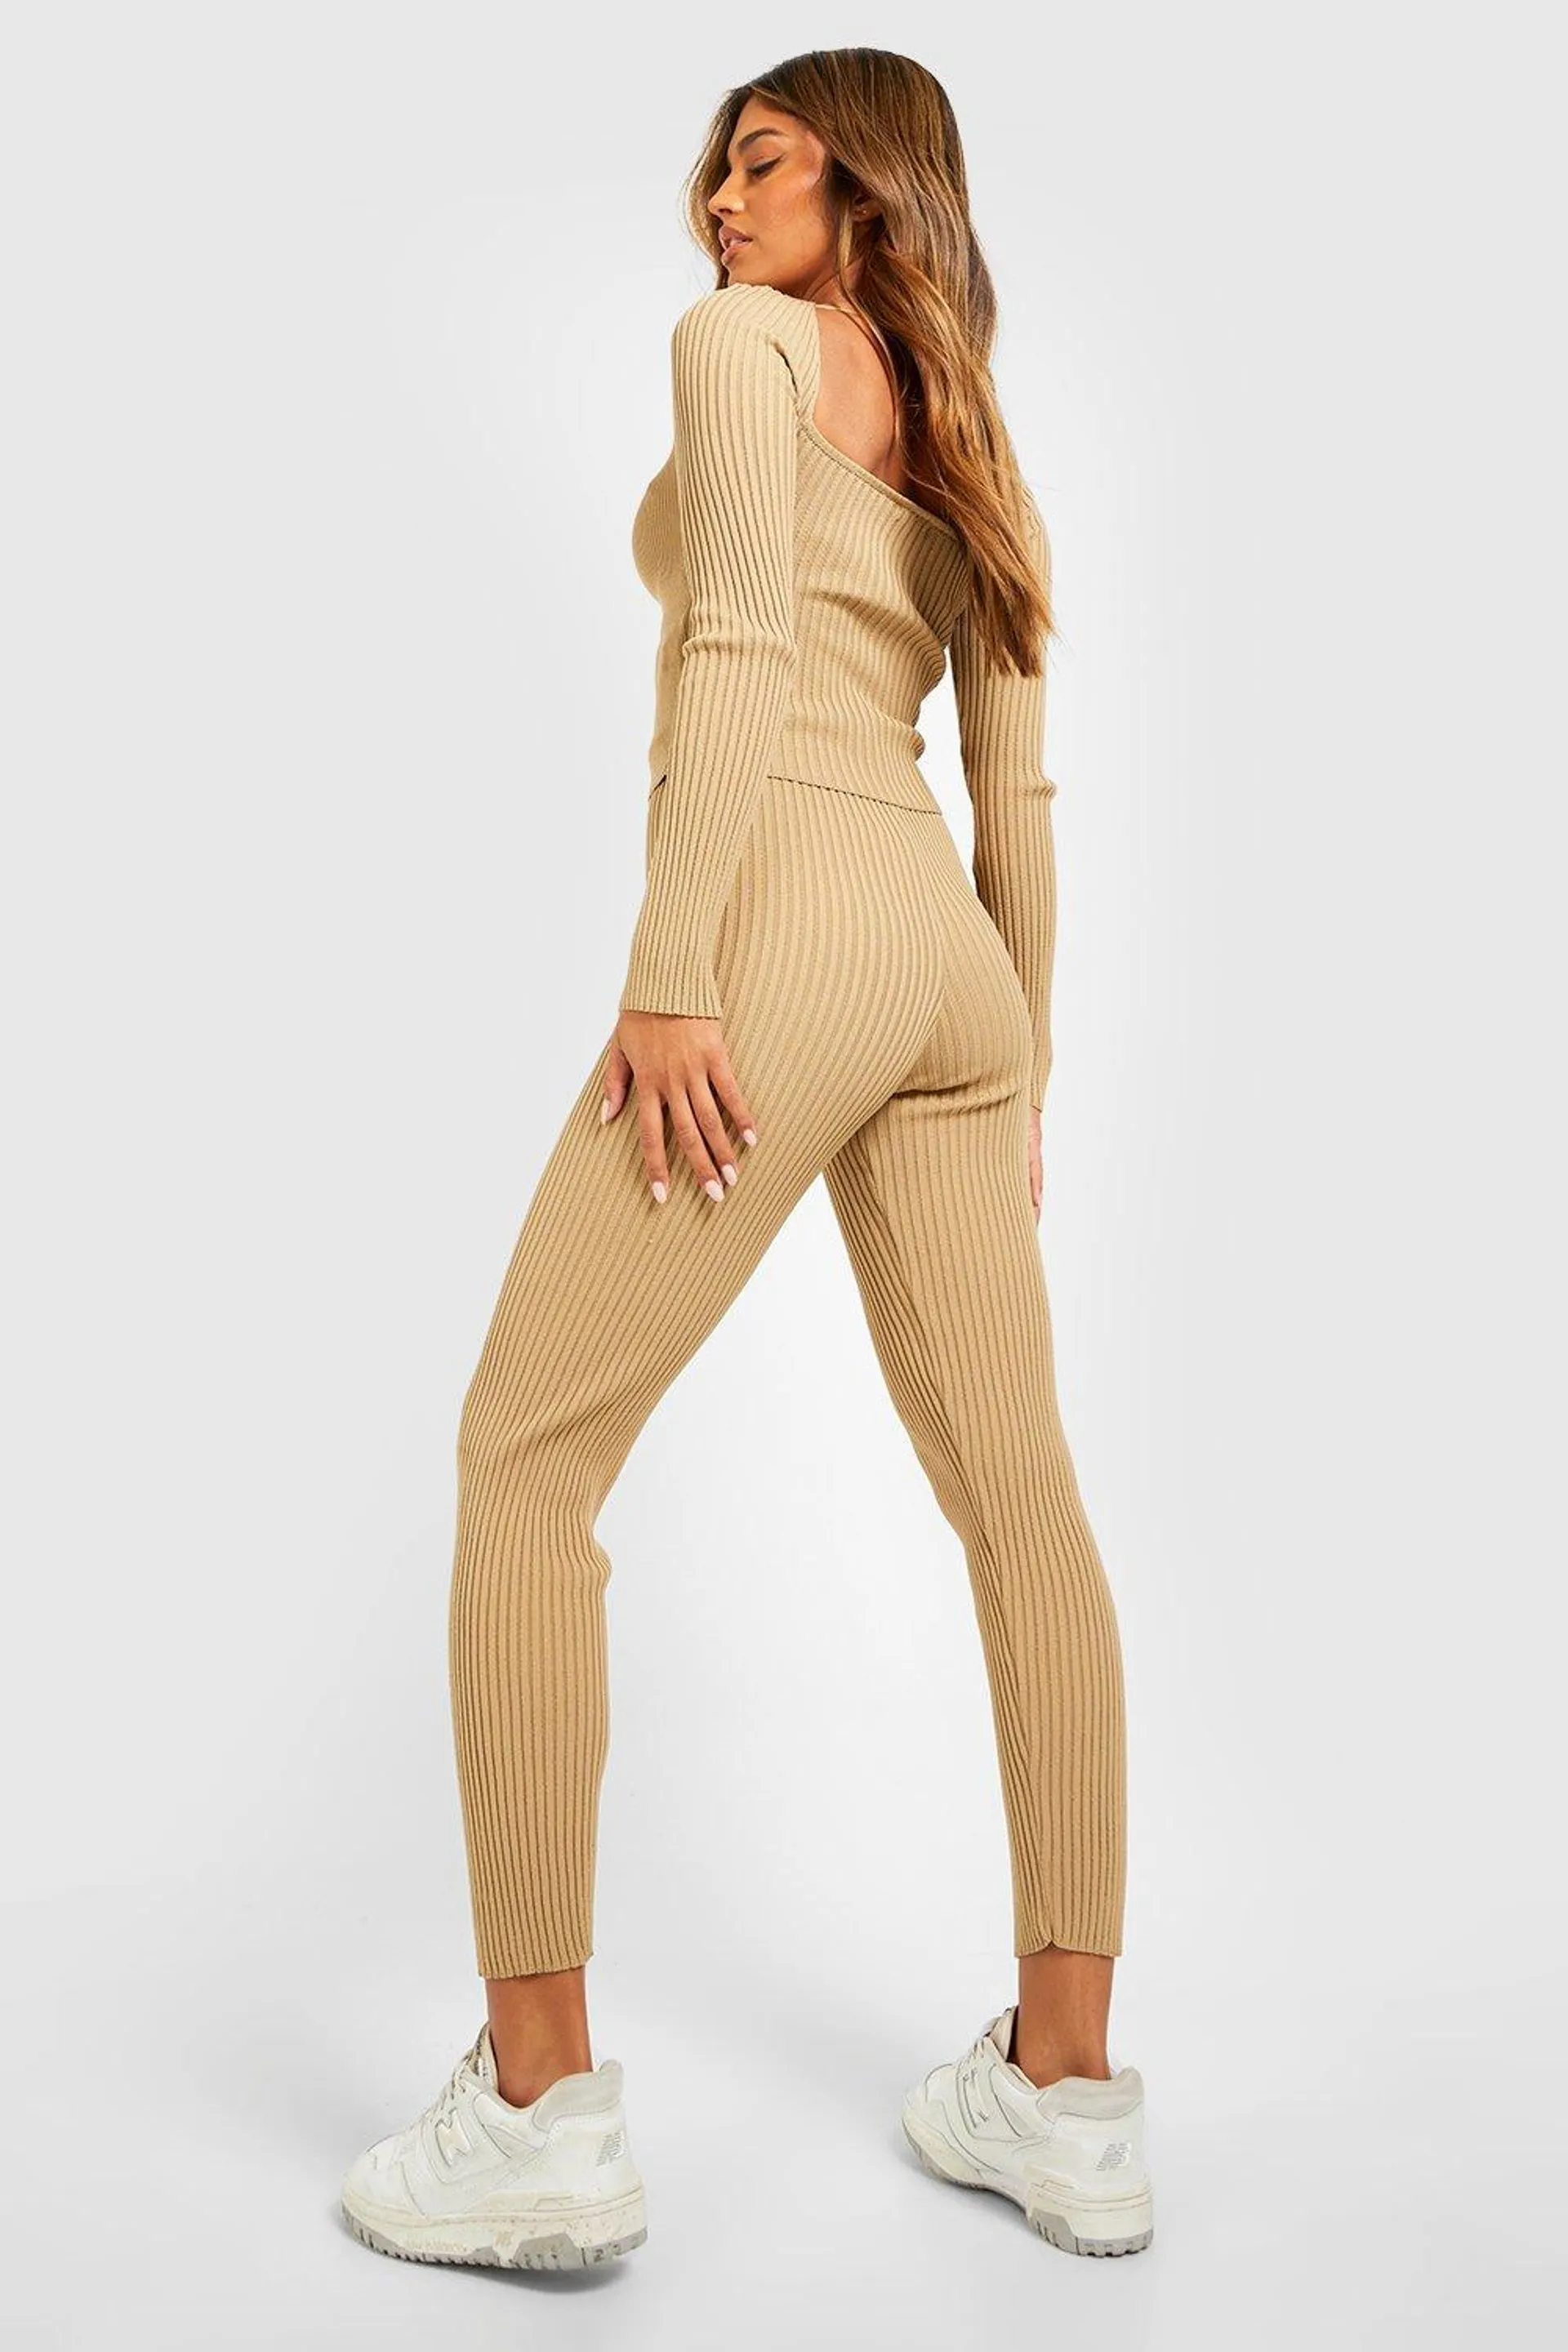 Knitted Corset And Leggings Co-ord